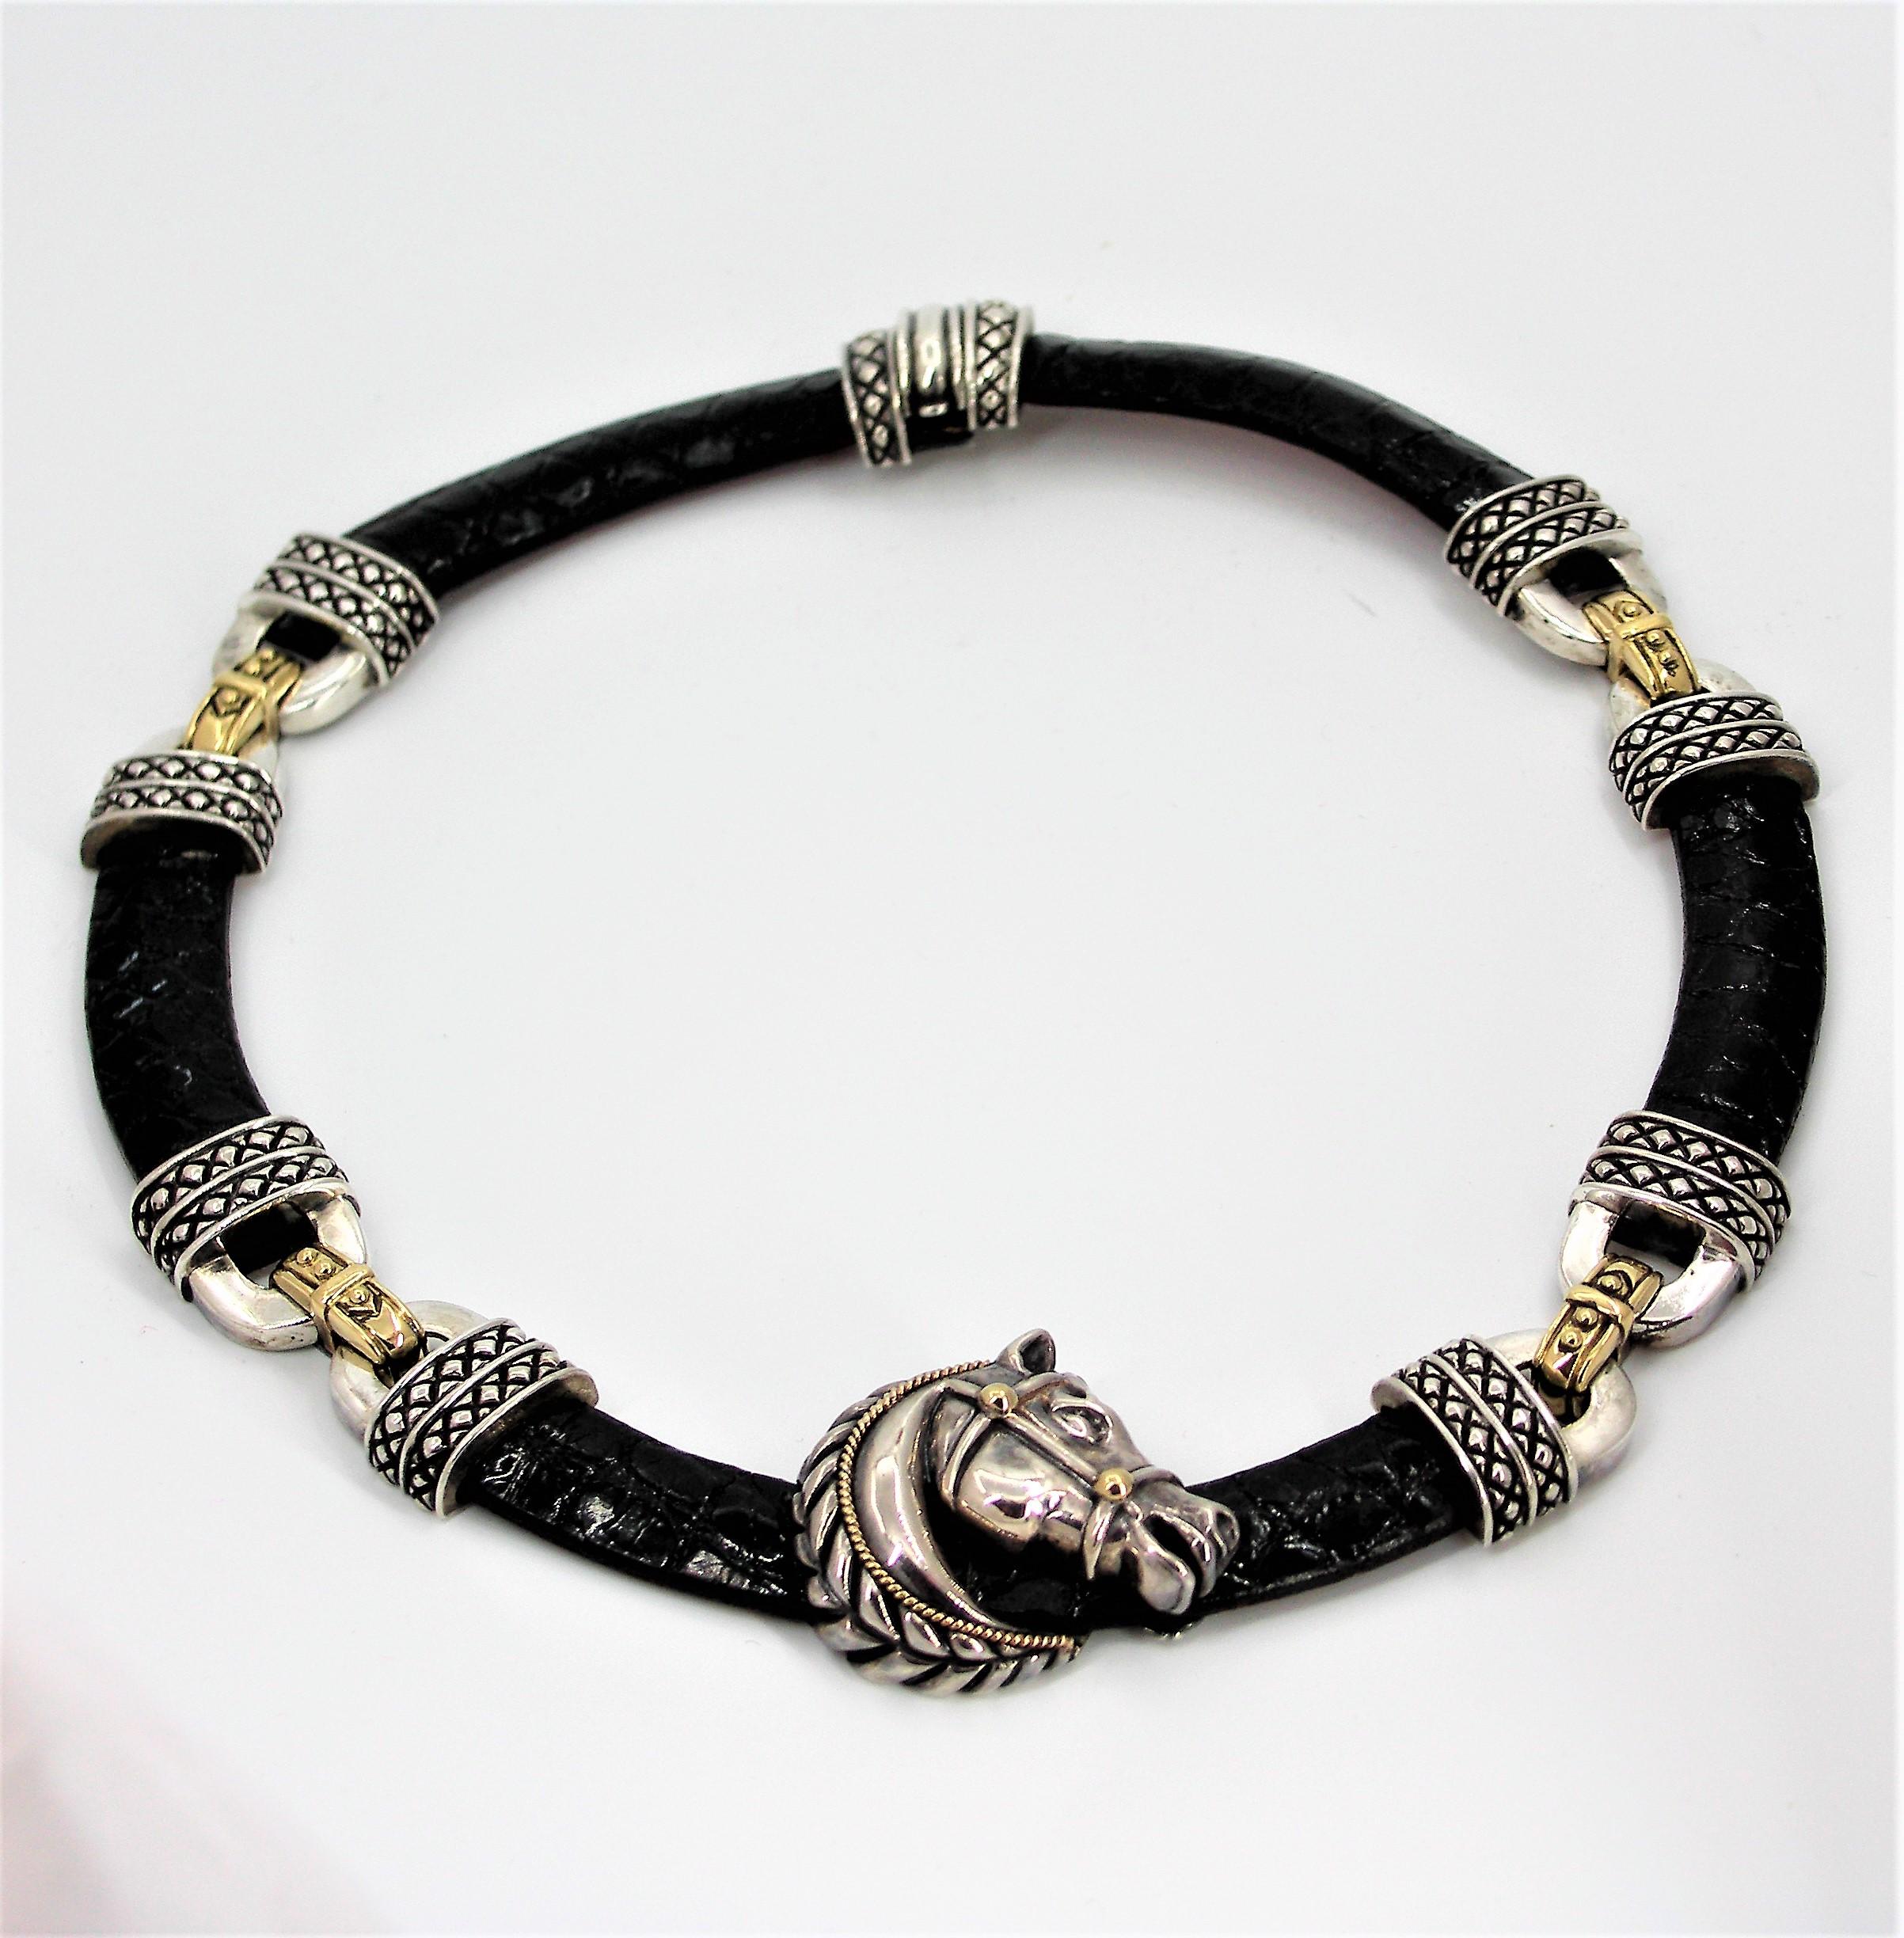 Made by Nancy & David, this black, textured leather necklace has one center, 
large, articulated horse head made of Sterling Silver with 18K yellow gold accents.
The four Sterling Silver stations are accented with 18K yellow gold connecting
links.